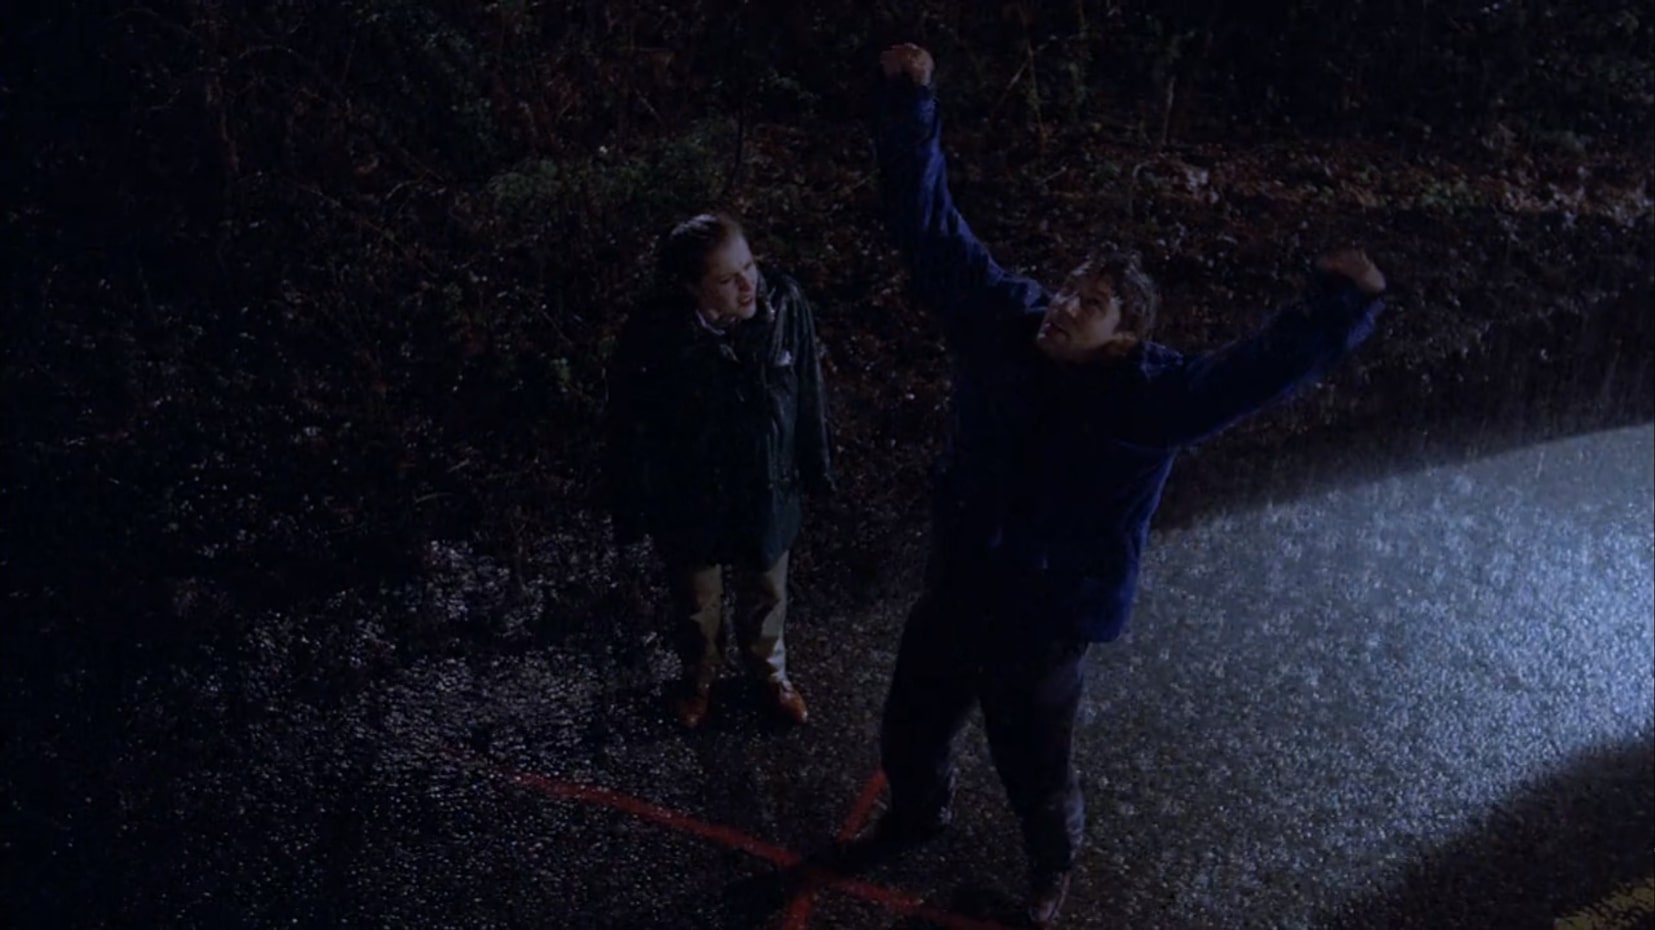 It's nighttime and it's raining. Scully and Mulder are standing on a country road wearing rain coats. At their feet is a red X Mulder had spray-painted earlier that day. He's looking up at the sky, his fists raised in the air, a triumphant expression on his face. Scully, to his right, stares at him like he's crazy. Her hair is pulled back in a ponytail.